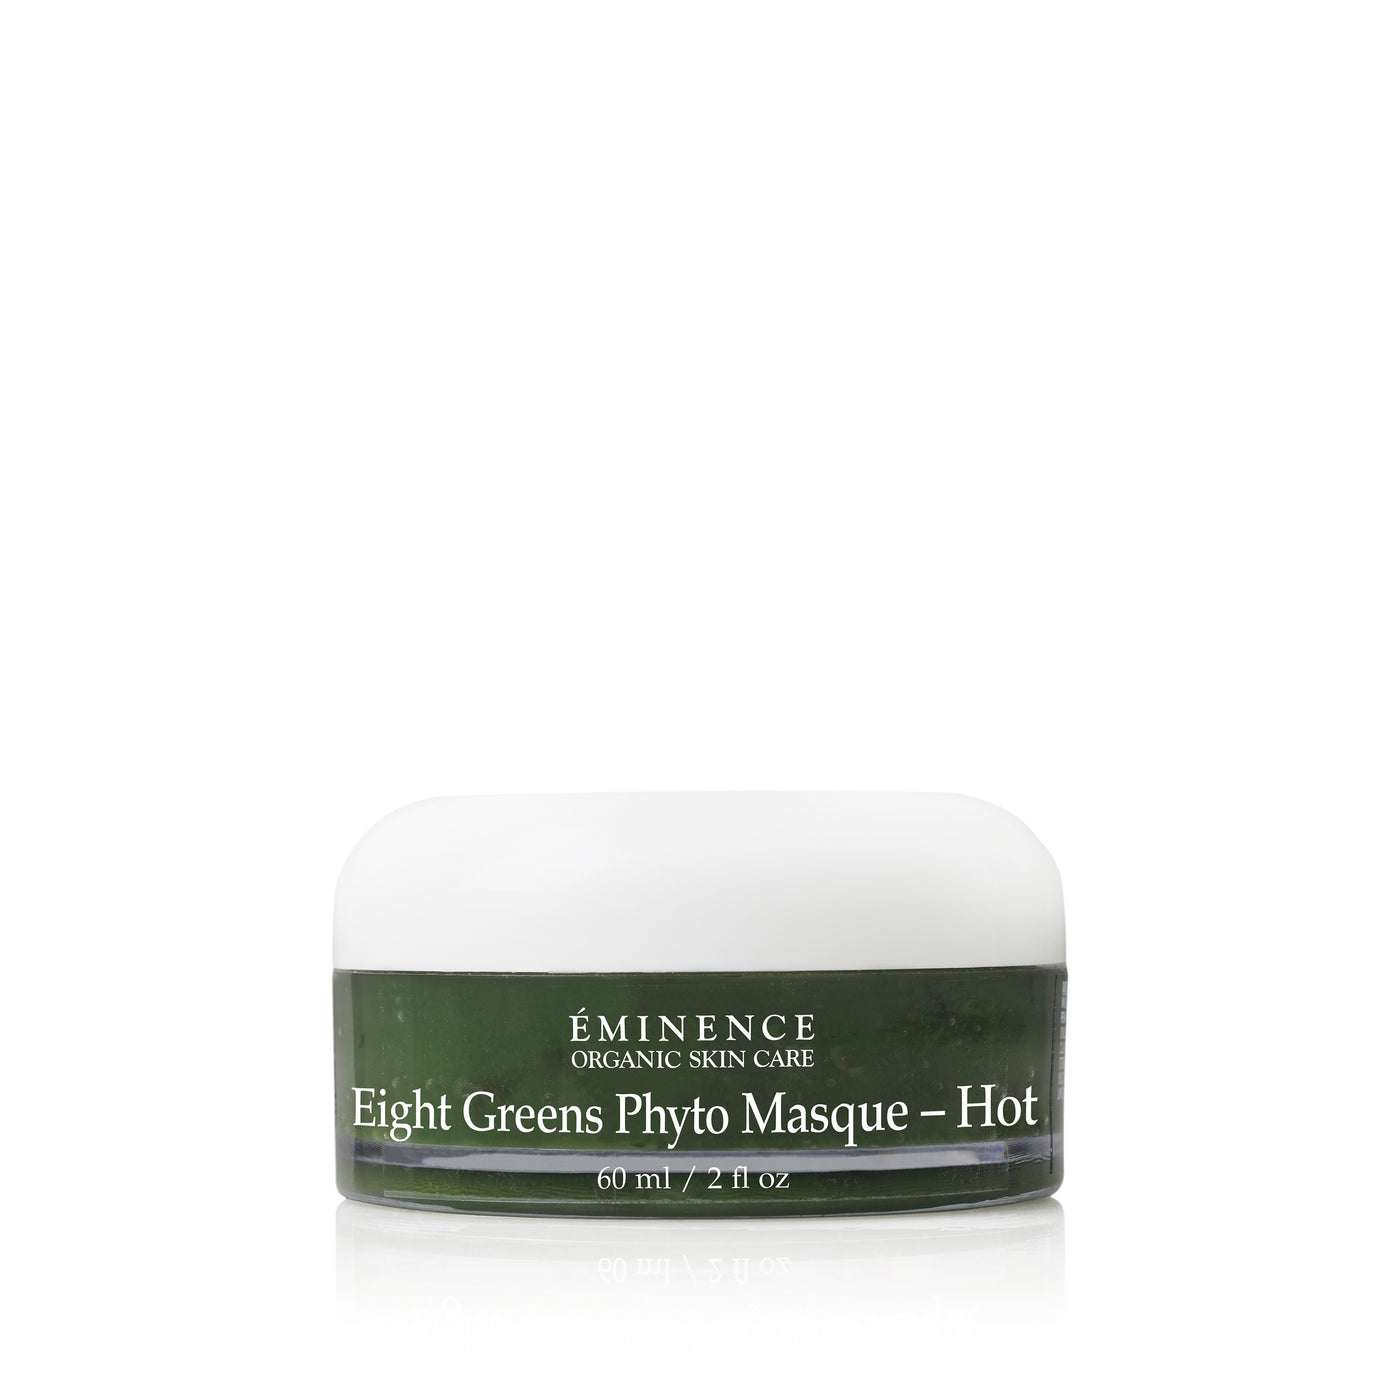 Eminence Organics  Eight Greens Phyto Masque (Hot) - Radiance Clean Beauty